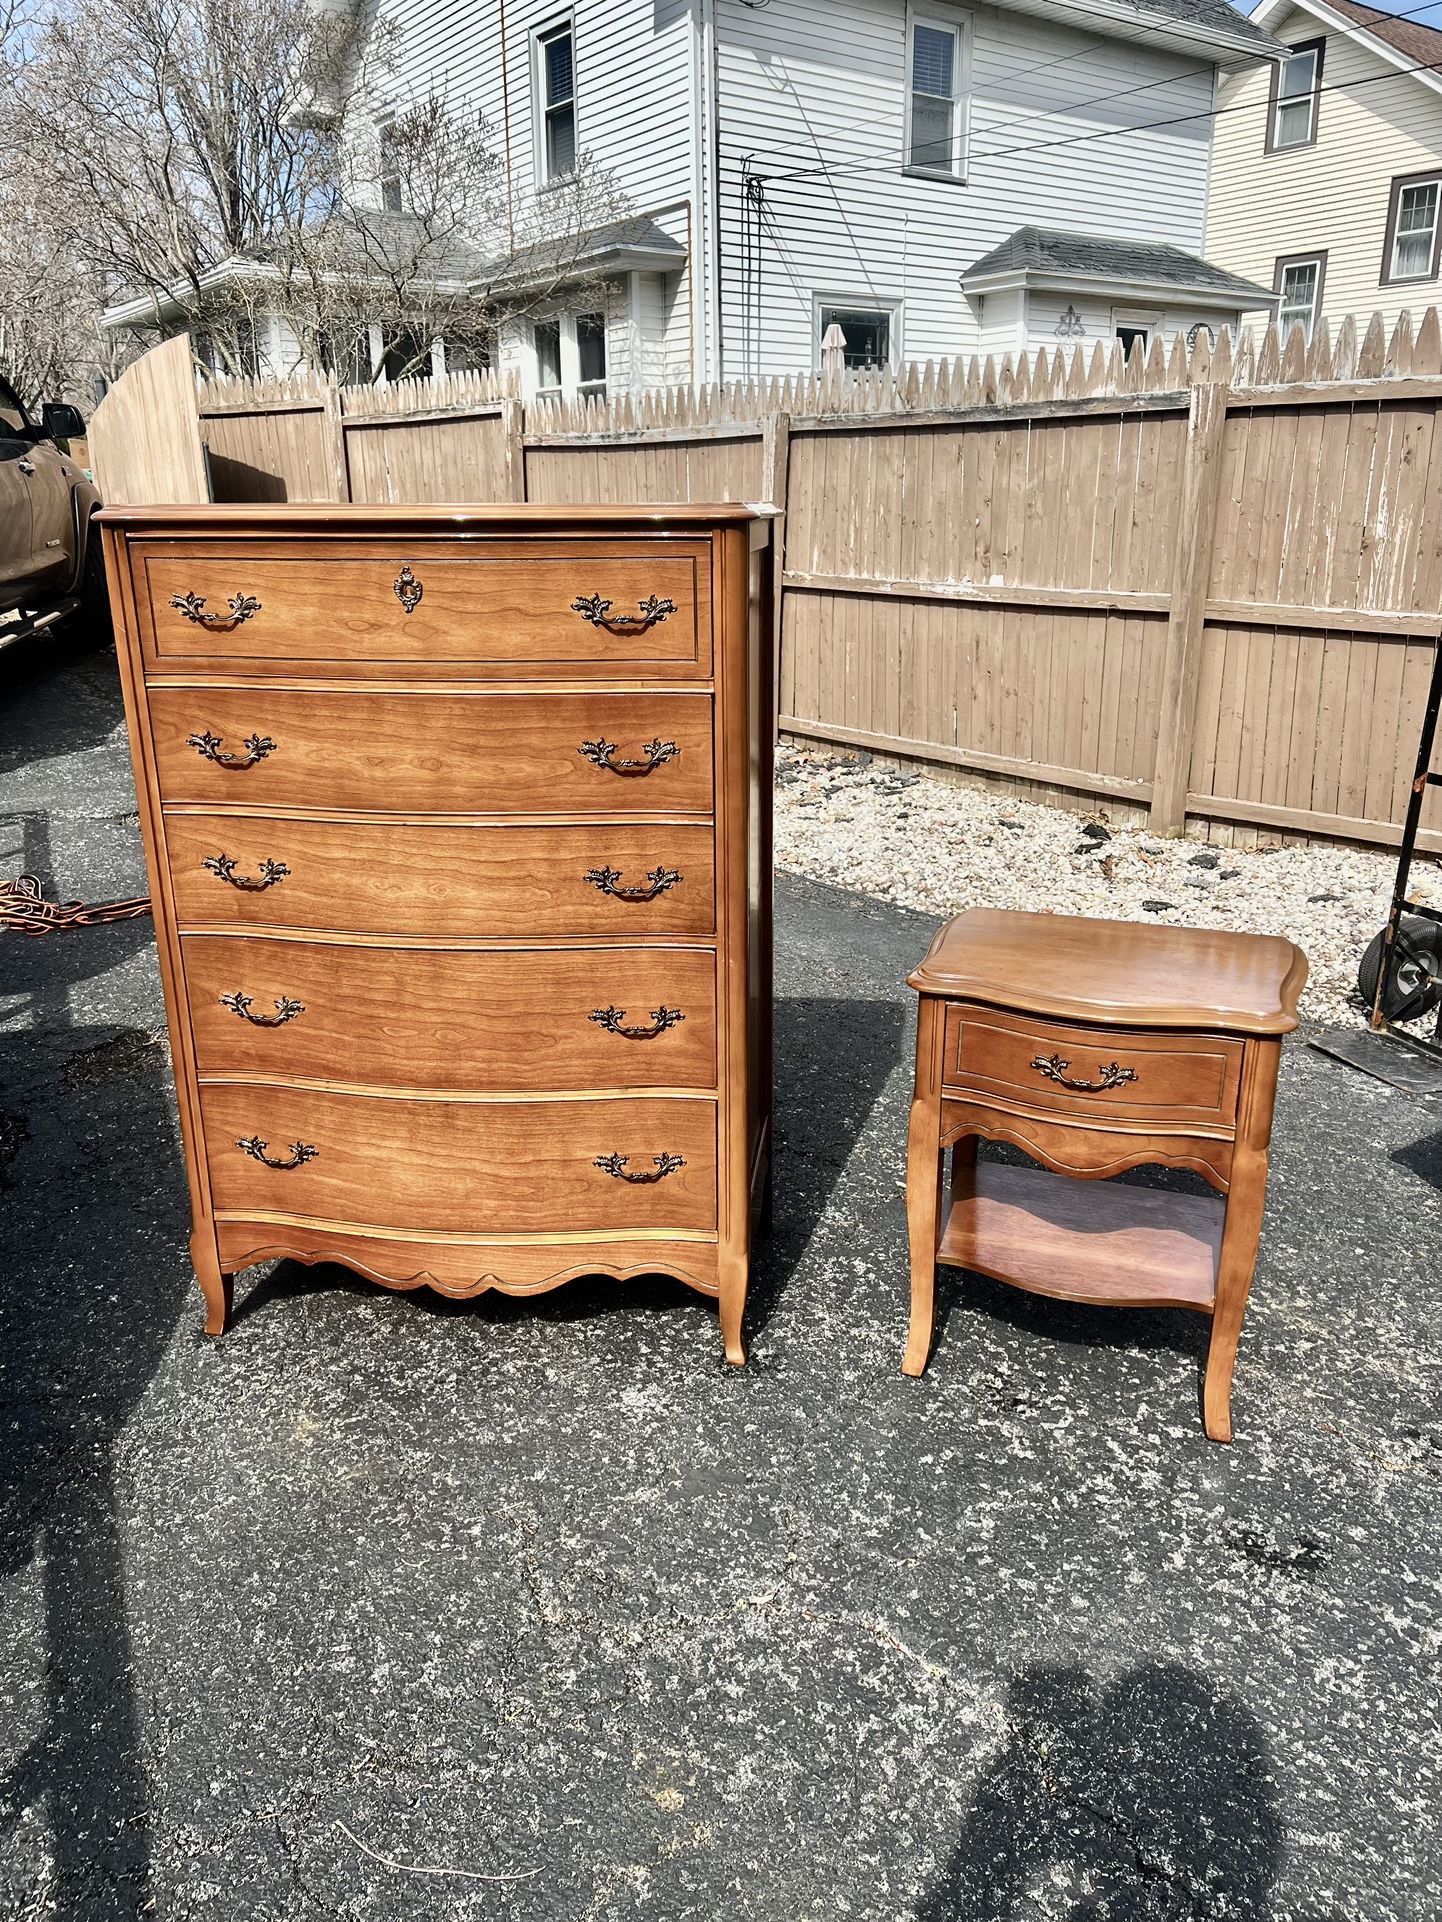 Reduced $300 firm Nice Bassett solid wood French Provincial Chest And Nightstand 